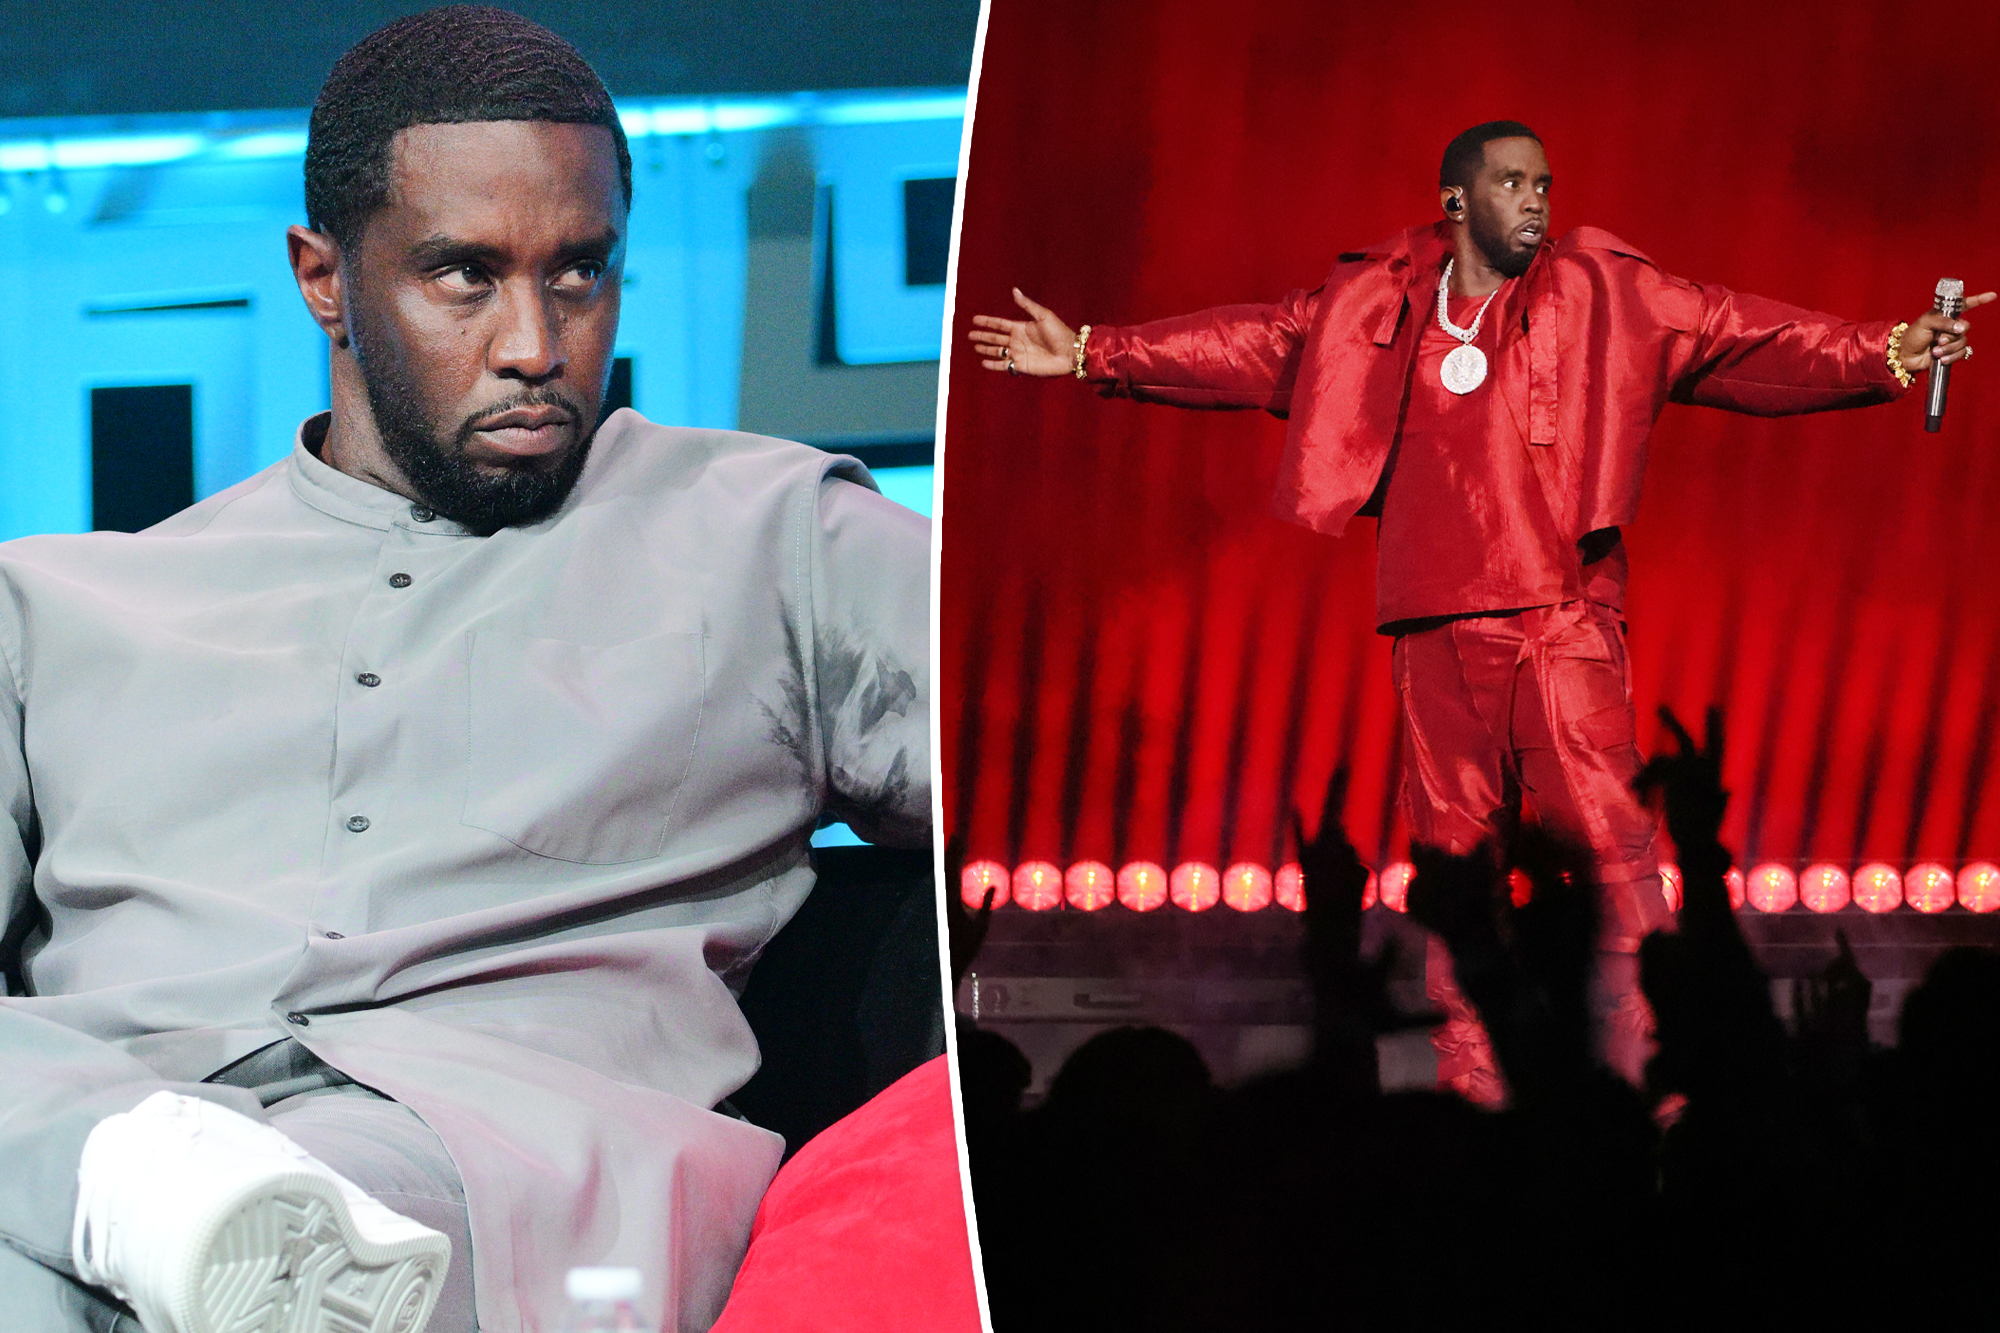 Sean ‘Diddy’ Combs: A Closer Look at Allegations of Abusive Behavior